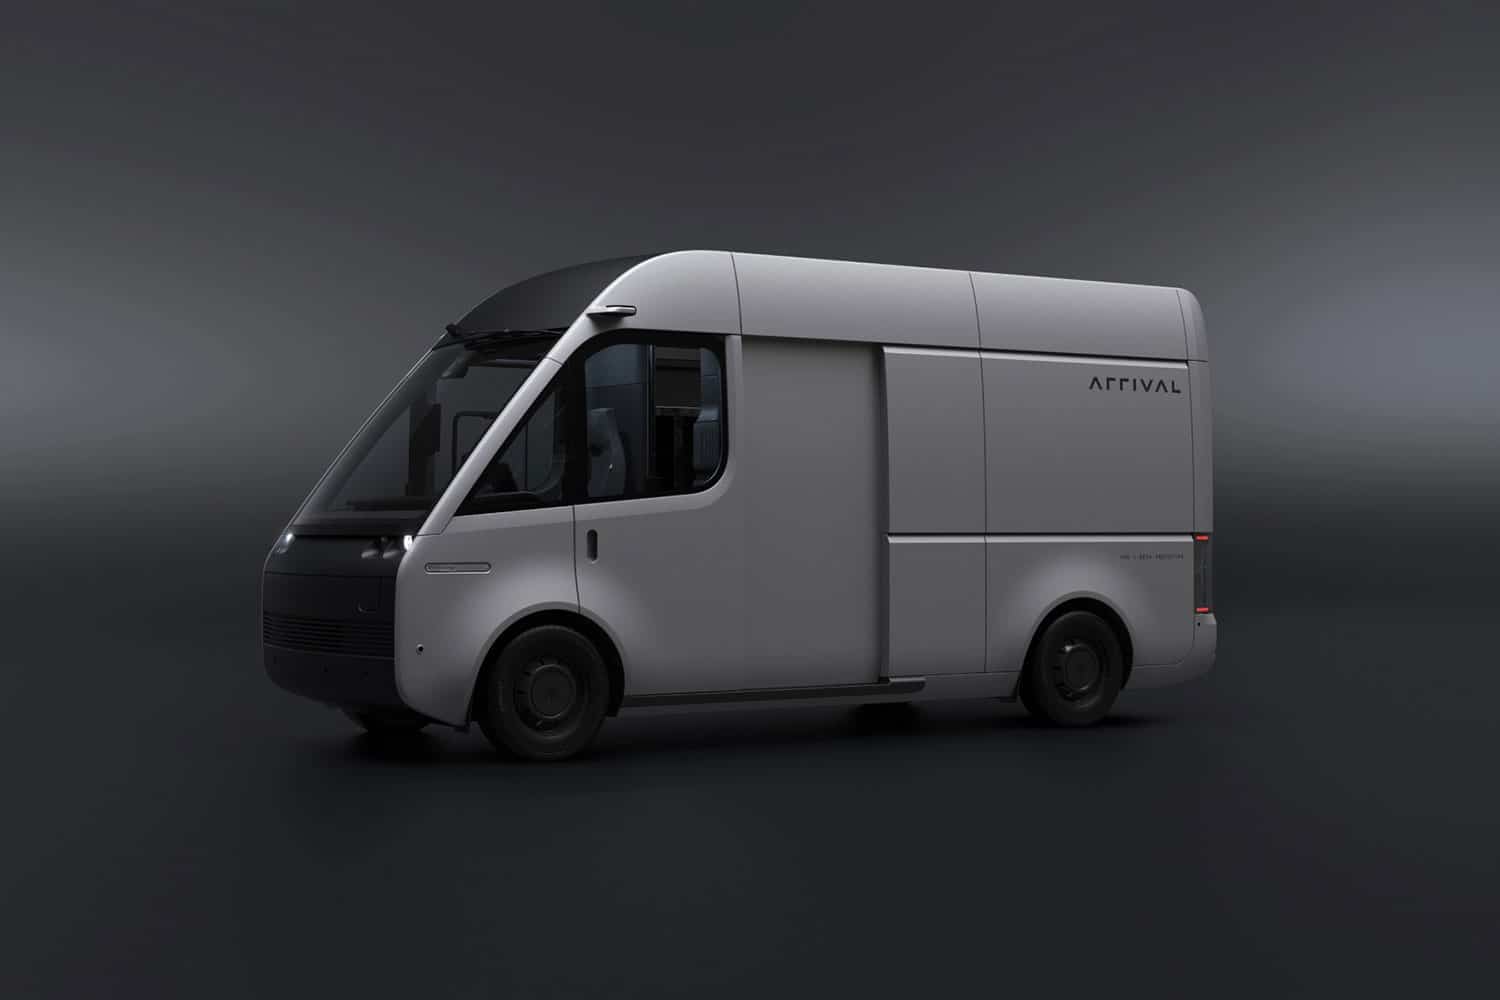 Arrival showed the Beta prototype of its electric van with improved design.